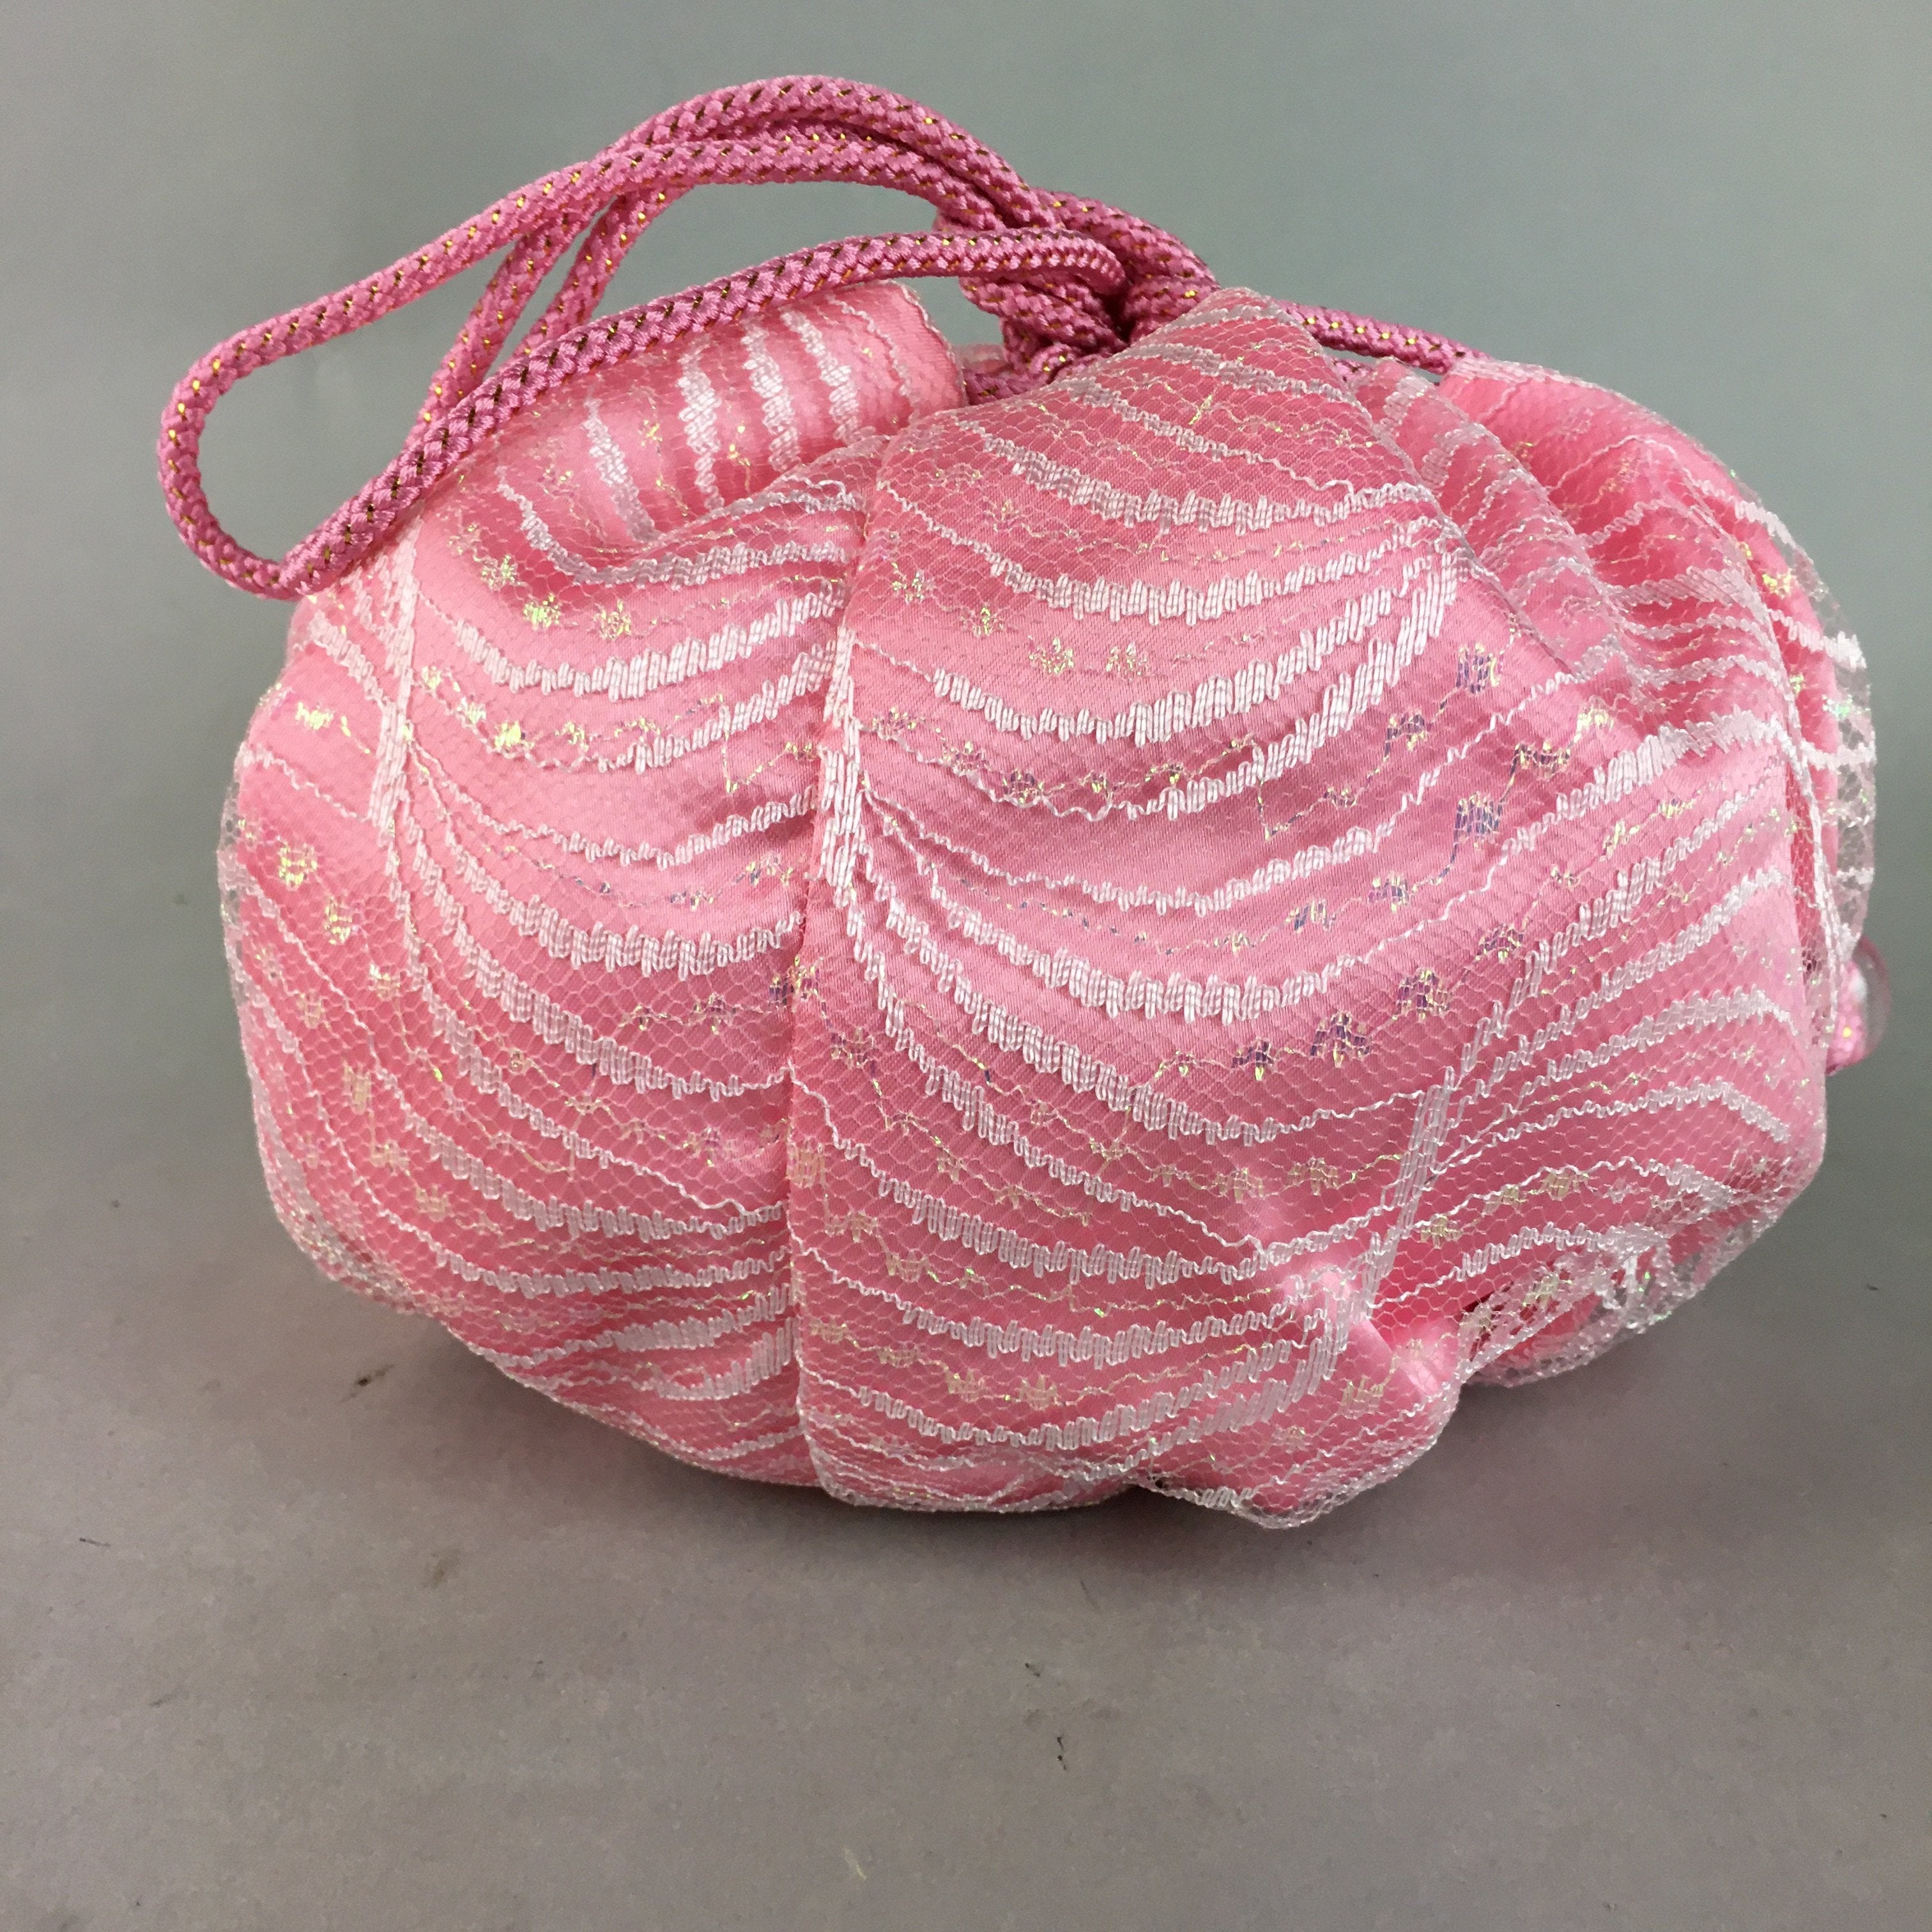 Drawstring Bag with Japanese pattern, Kimono - Silk - for Clear